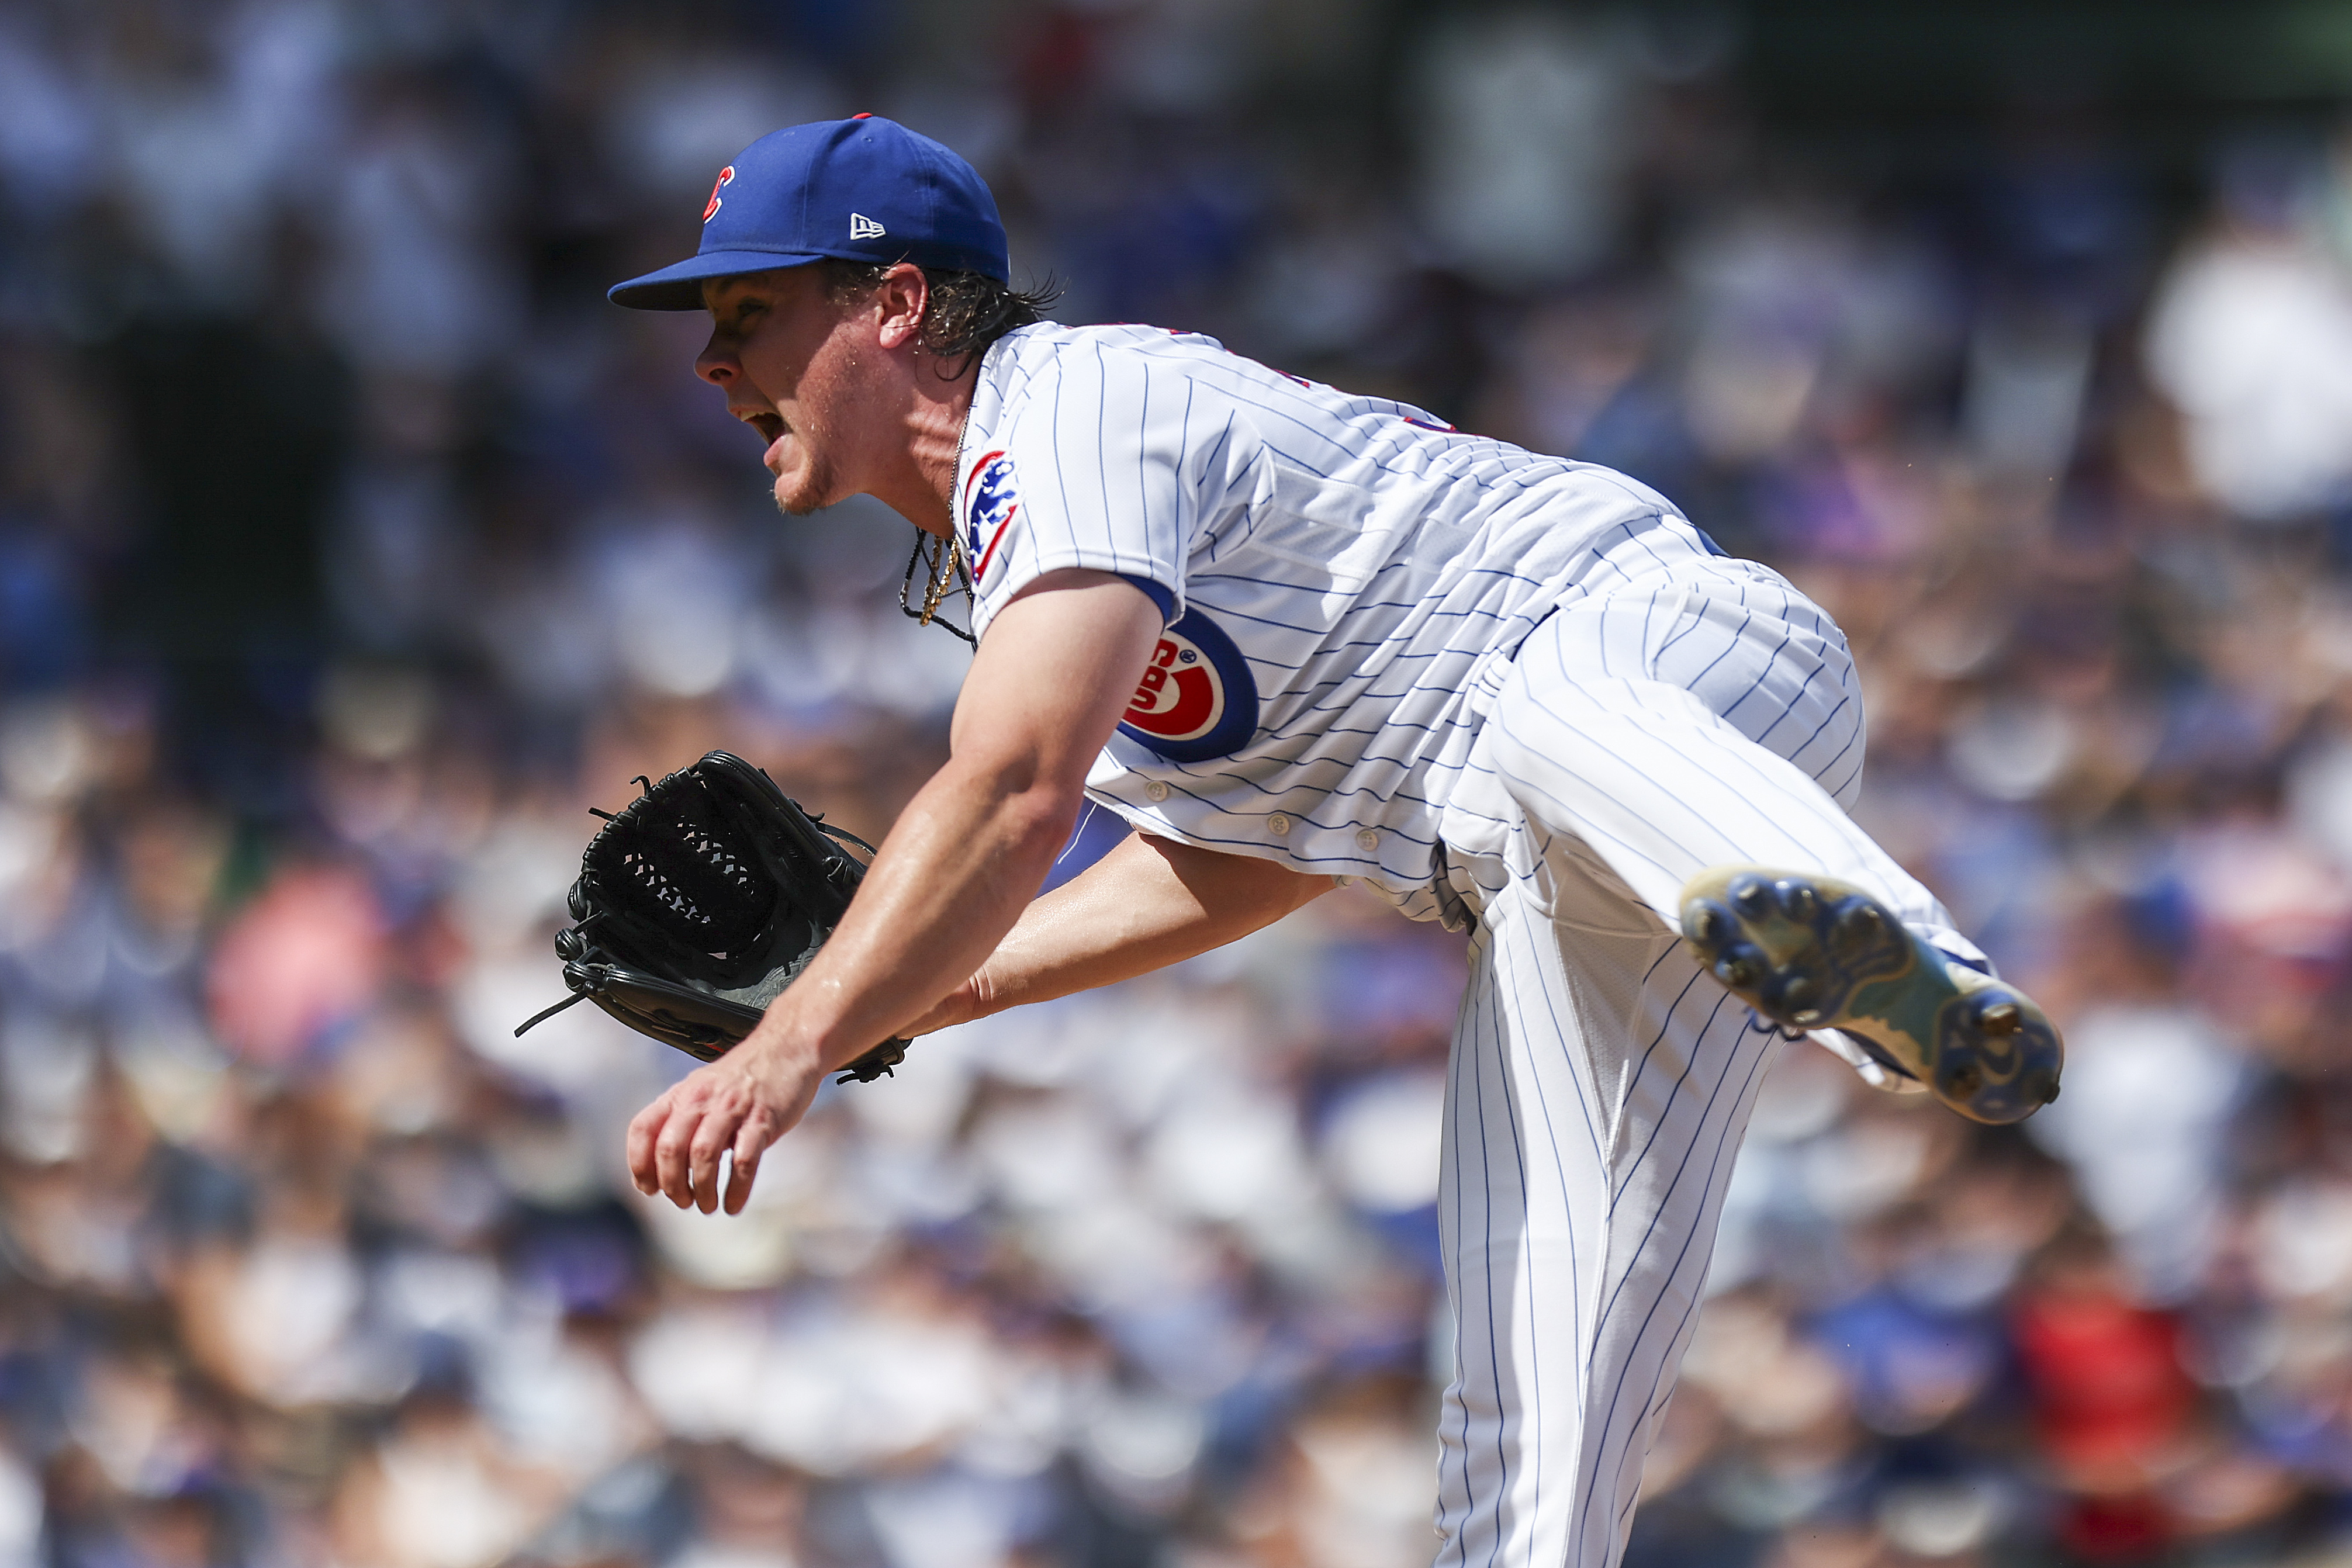 Yan Gomes, Justin Steele guide Cubs past Padres